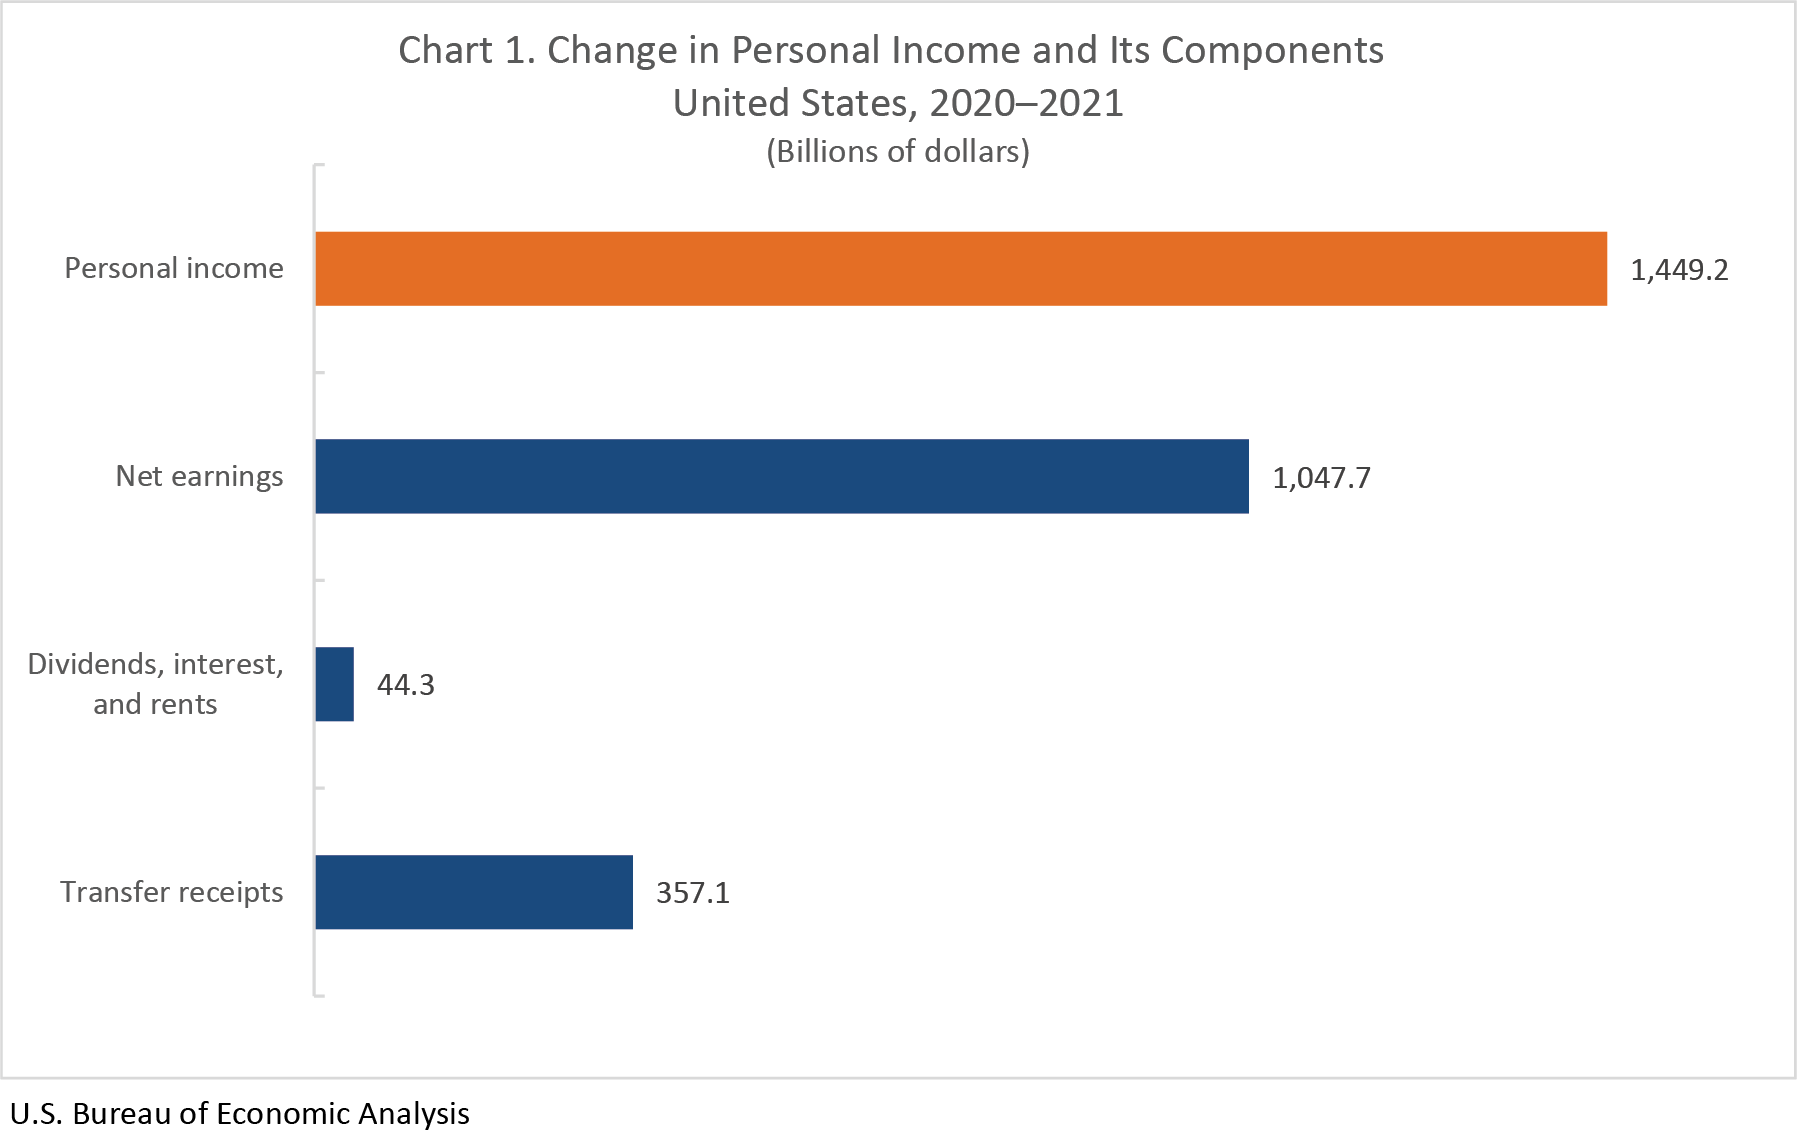 Chart 1. Change in Personal Income and Its Components: United States, 2020-2021 (Billions of dollars)